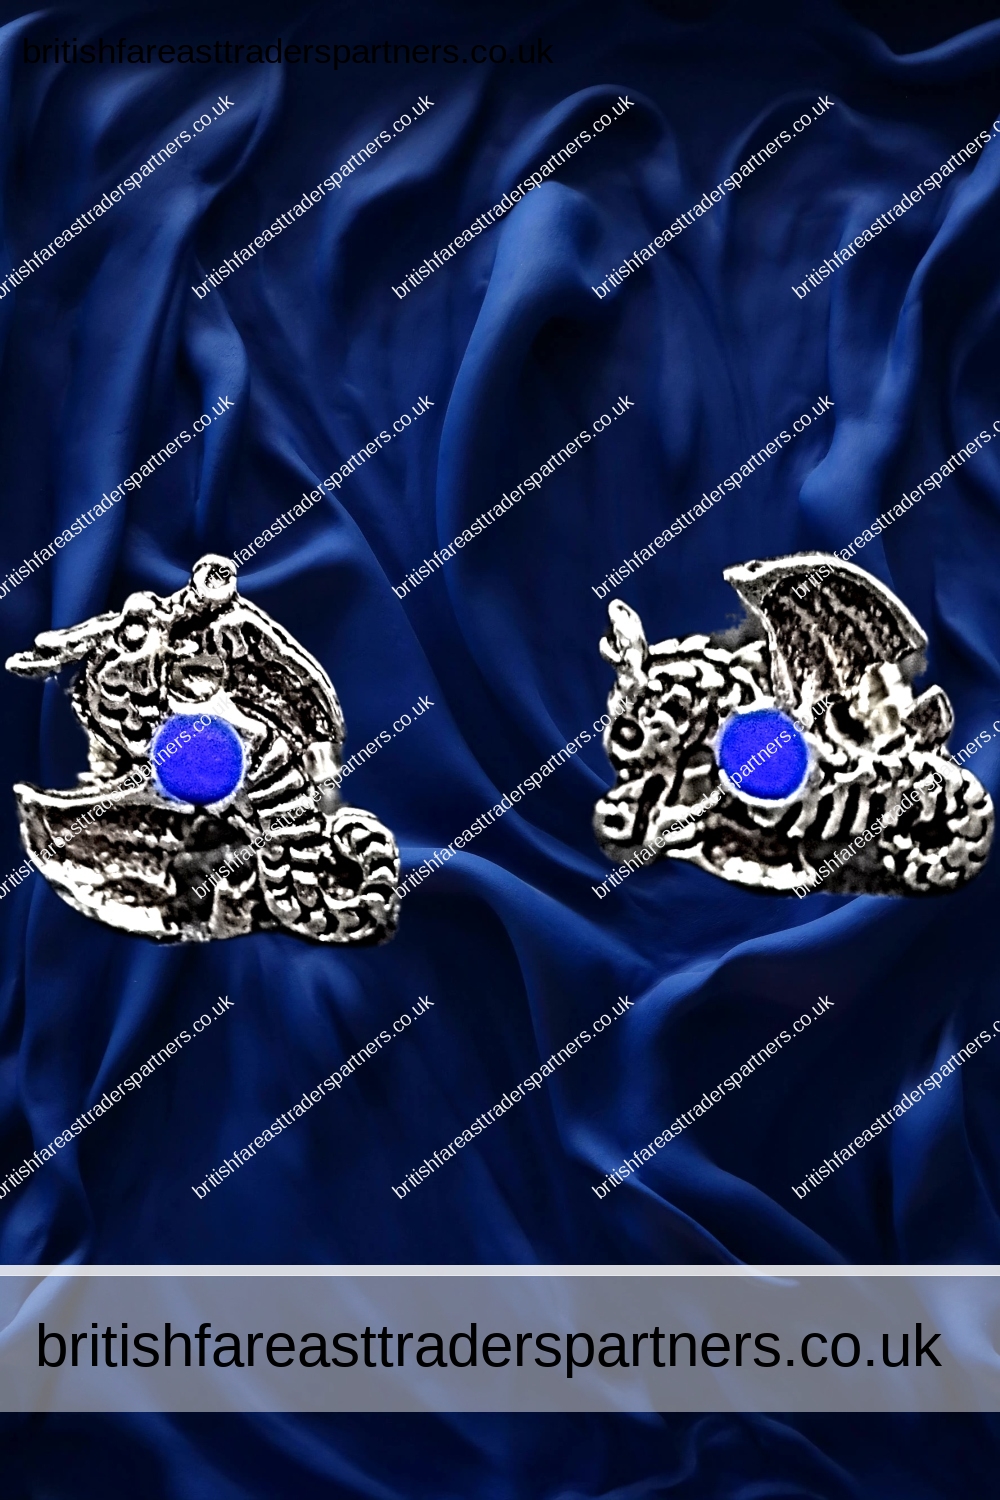 WELSH DRAGON BLUE HEART STERLING SILVER STUD EARRINGS EARRINGS | FINE JEWELLERY | STERLING SILVER | WALES / WELSH | DRAGON | HERITAGE | HISTORY | FASHION | CULTURE | LIFESTYLE